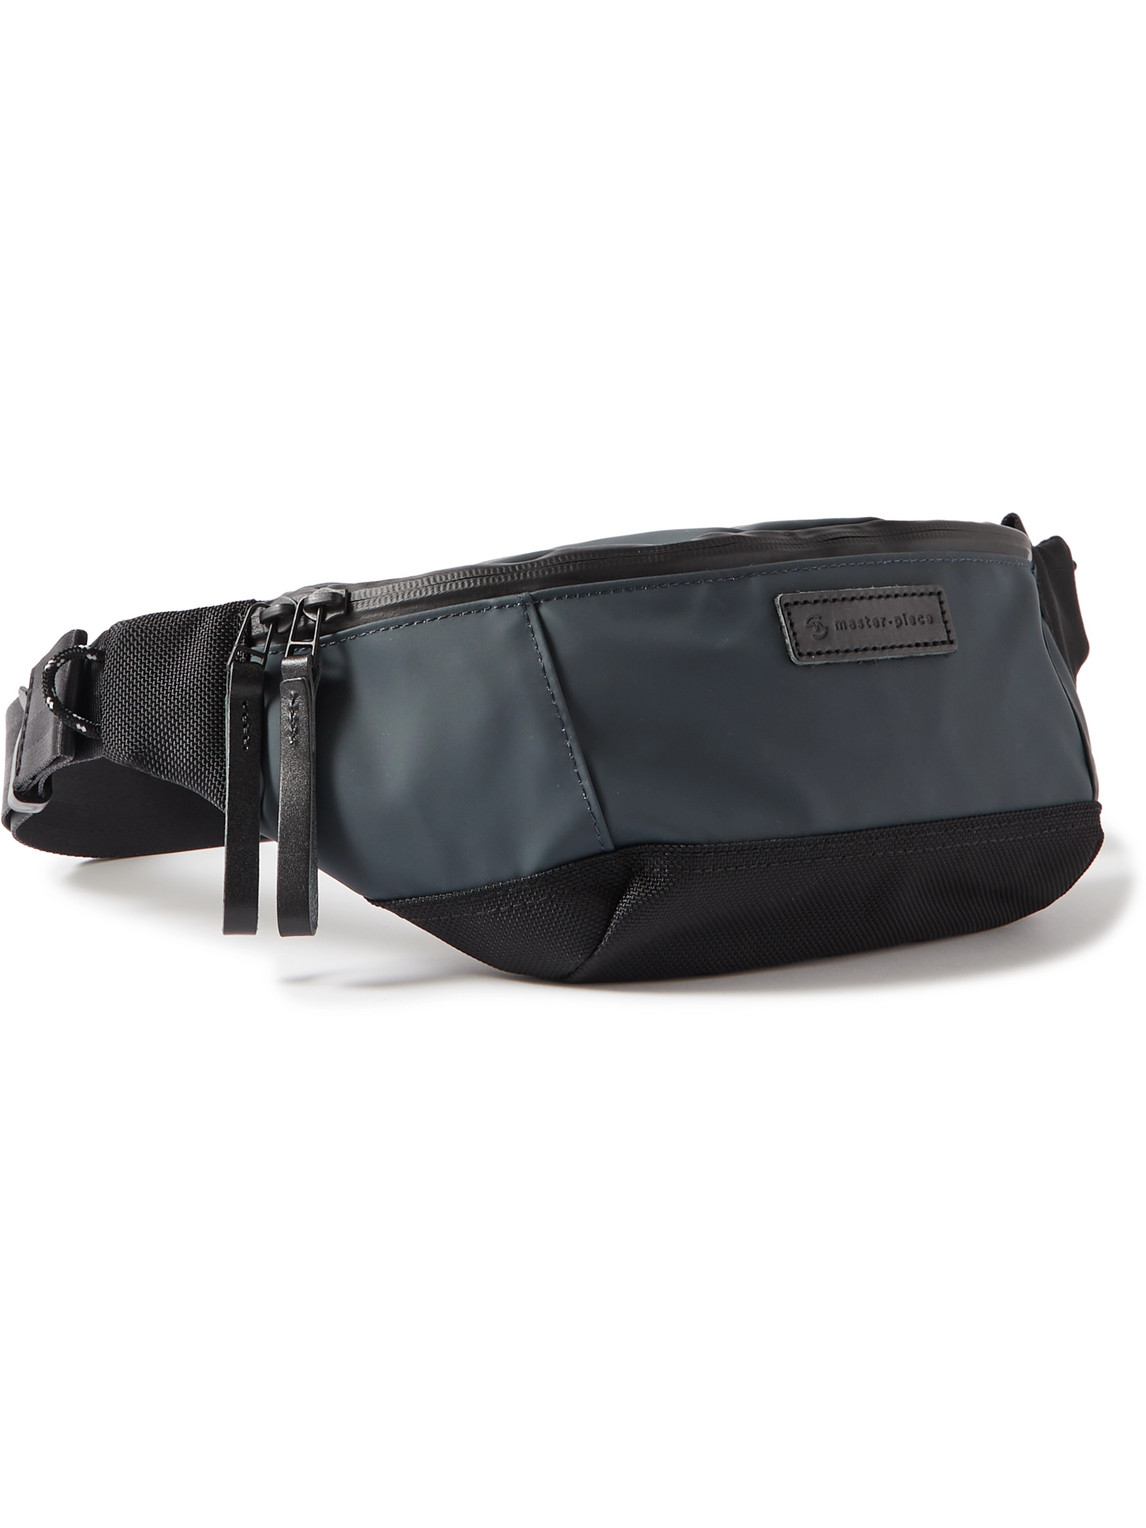 Leather- and CORDURA BALLISTIC-Trimmed Rubberised Shell Belt Bag